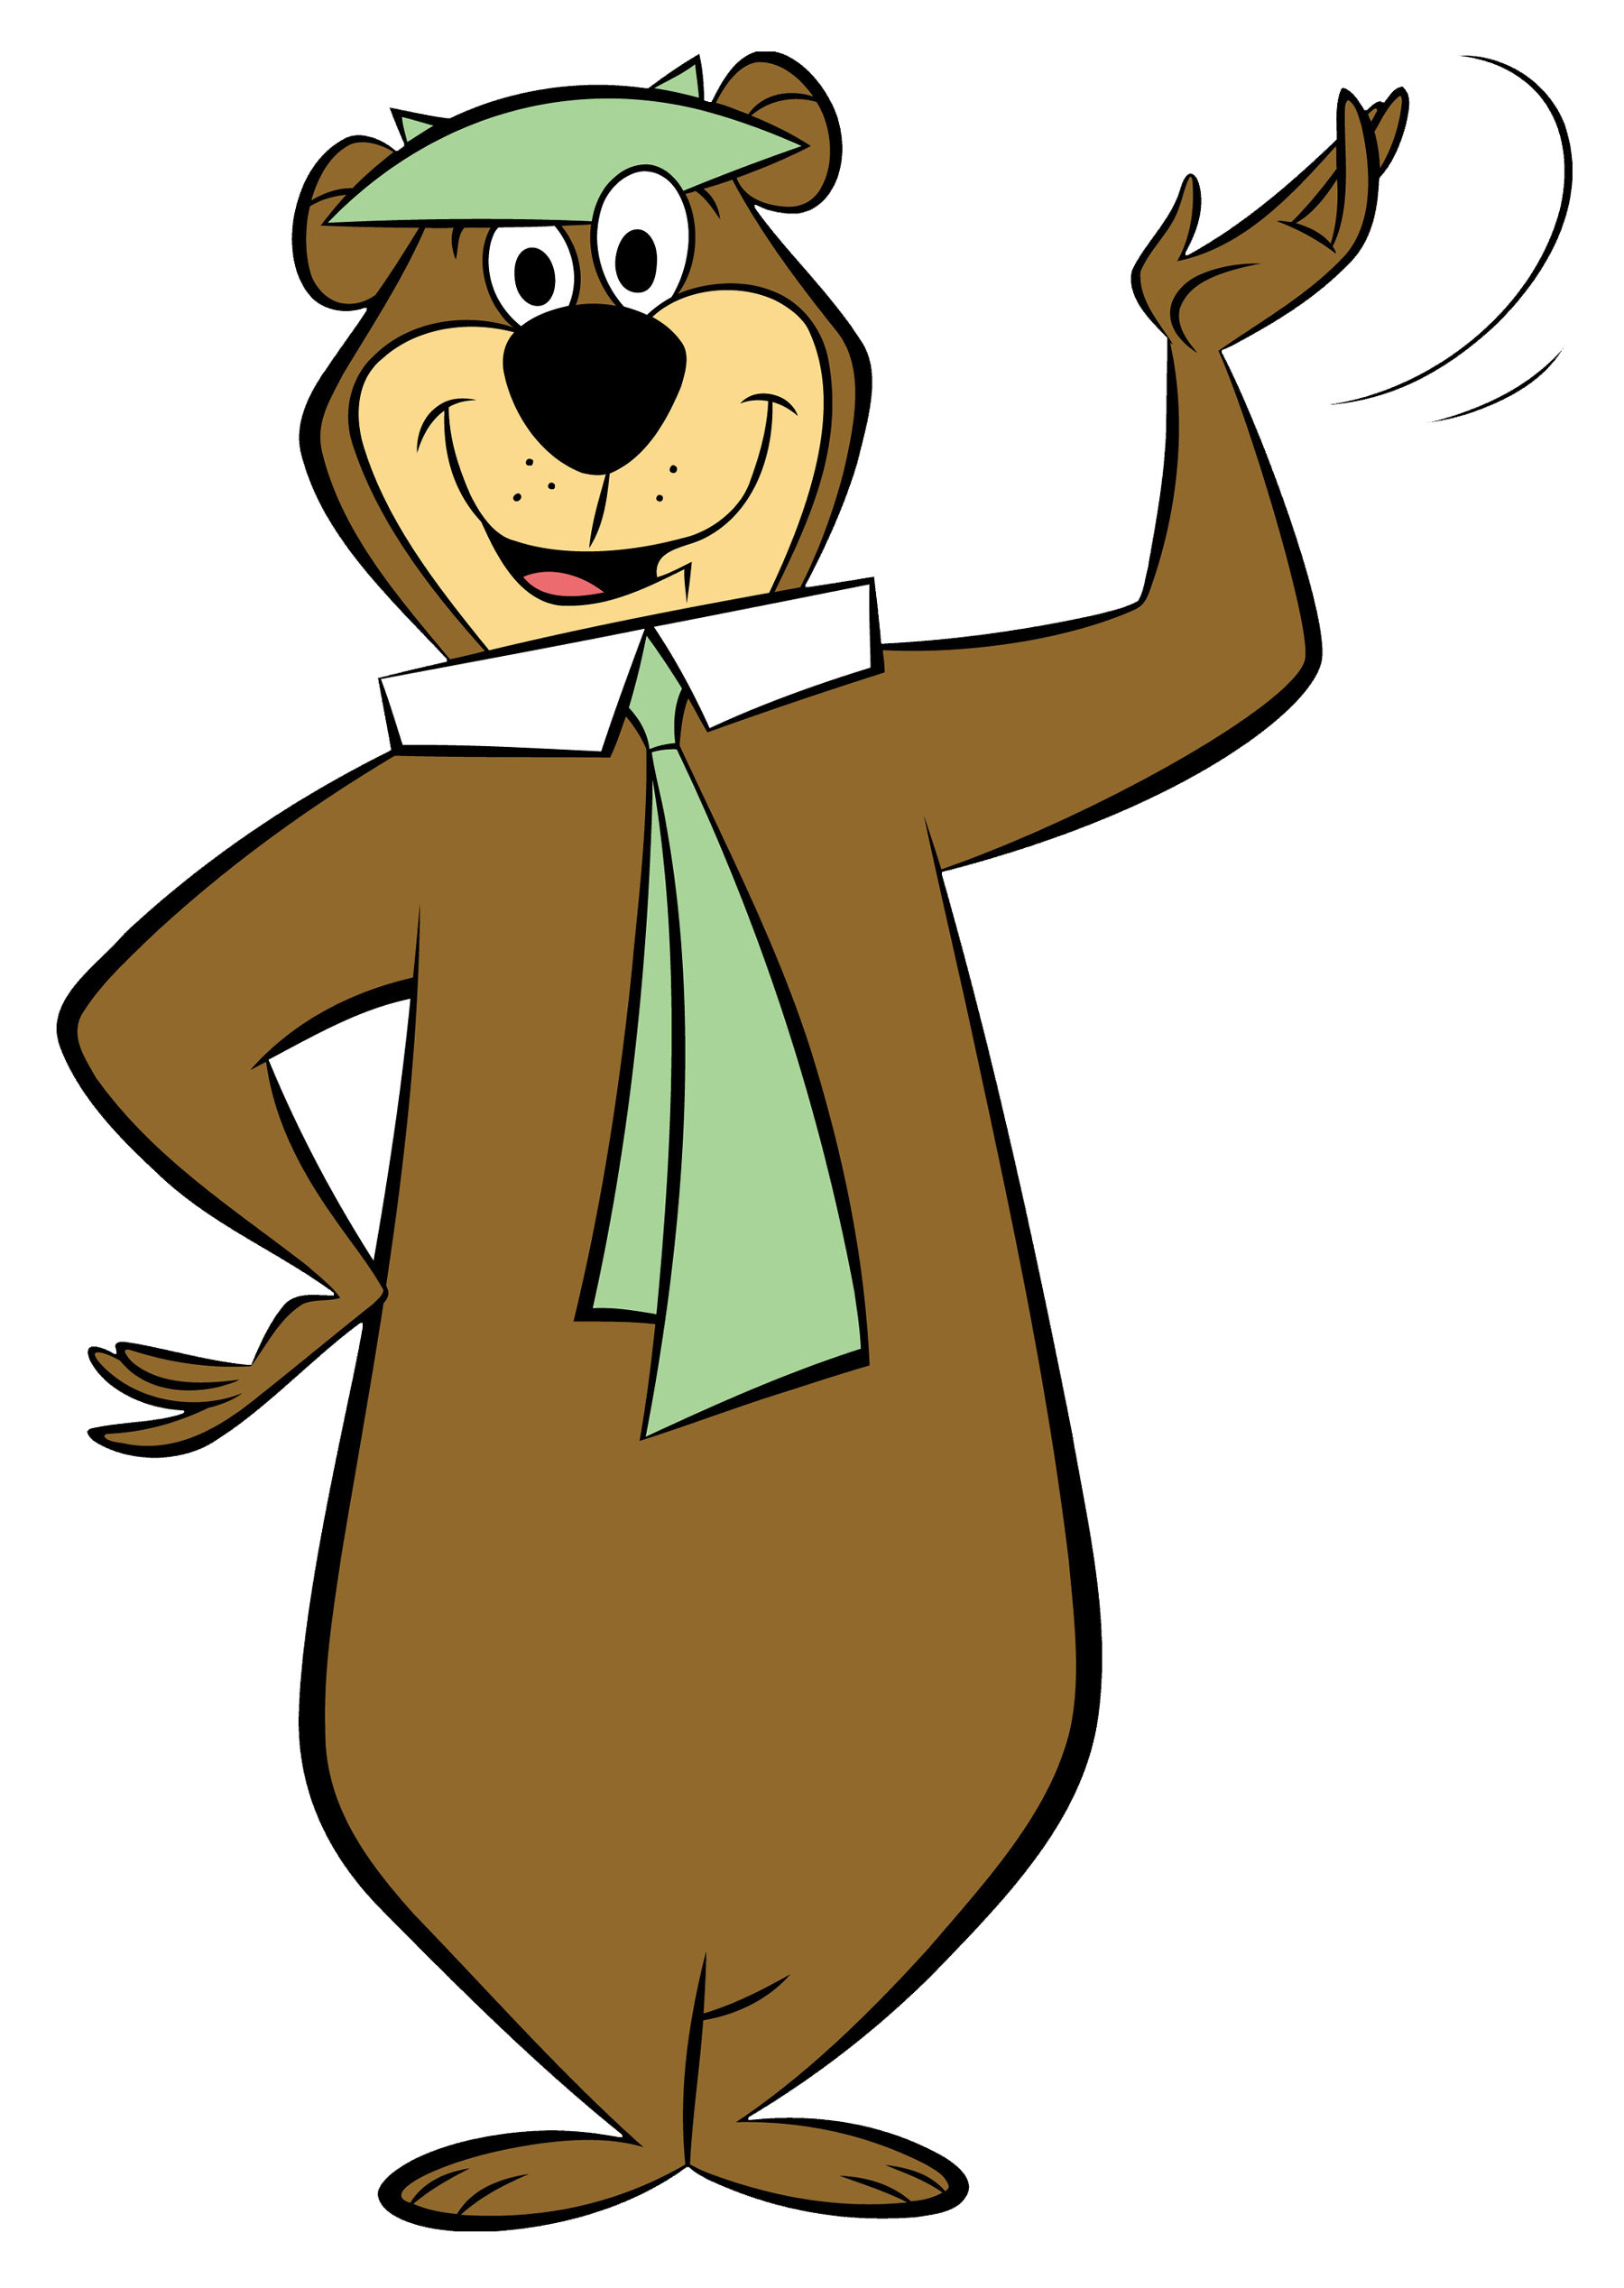 Details about   4 Bills ~ YOGI BEAR Cartoon Character in Shows ~ $1,000,000 One Million Dollars 